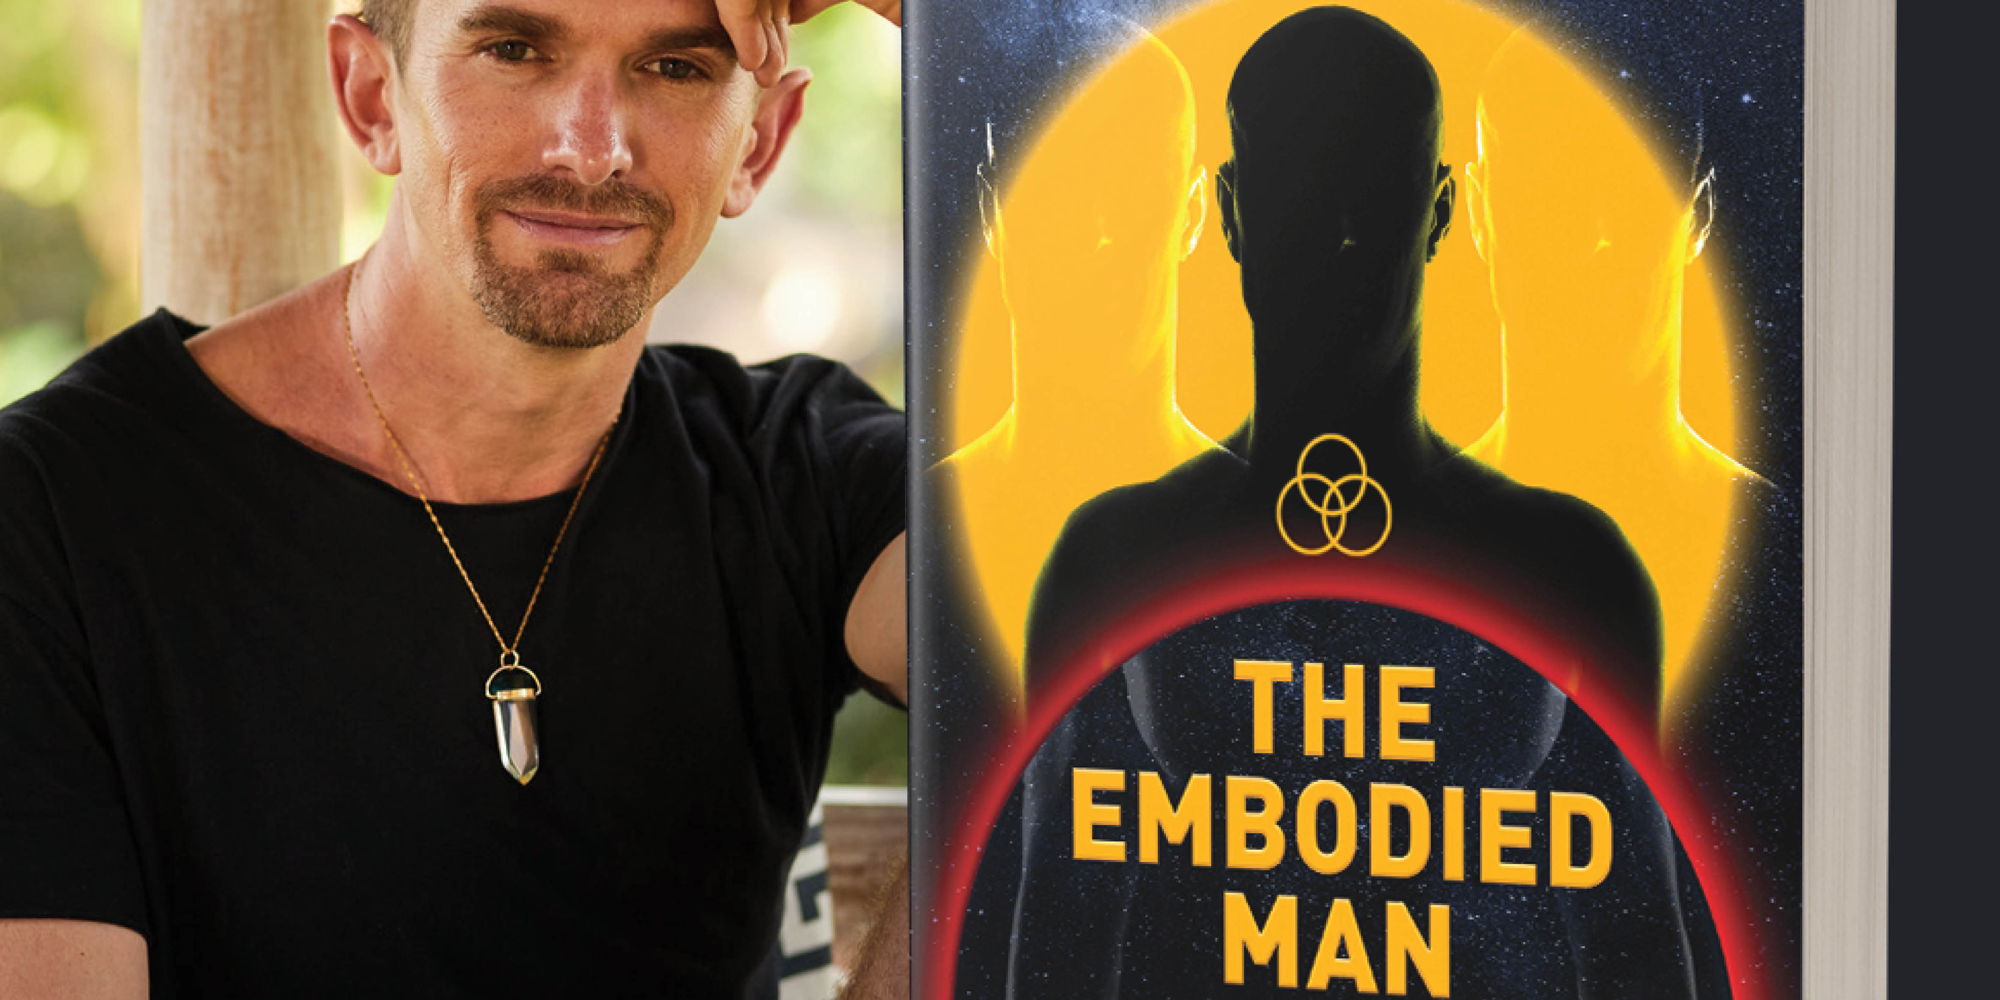  The Embodied Man Book Talk promotional image